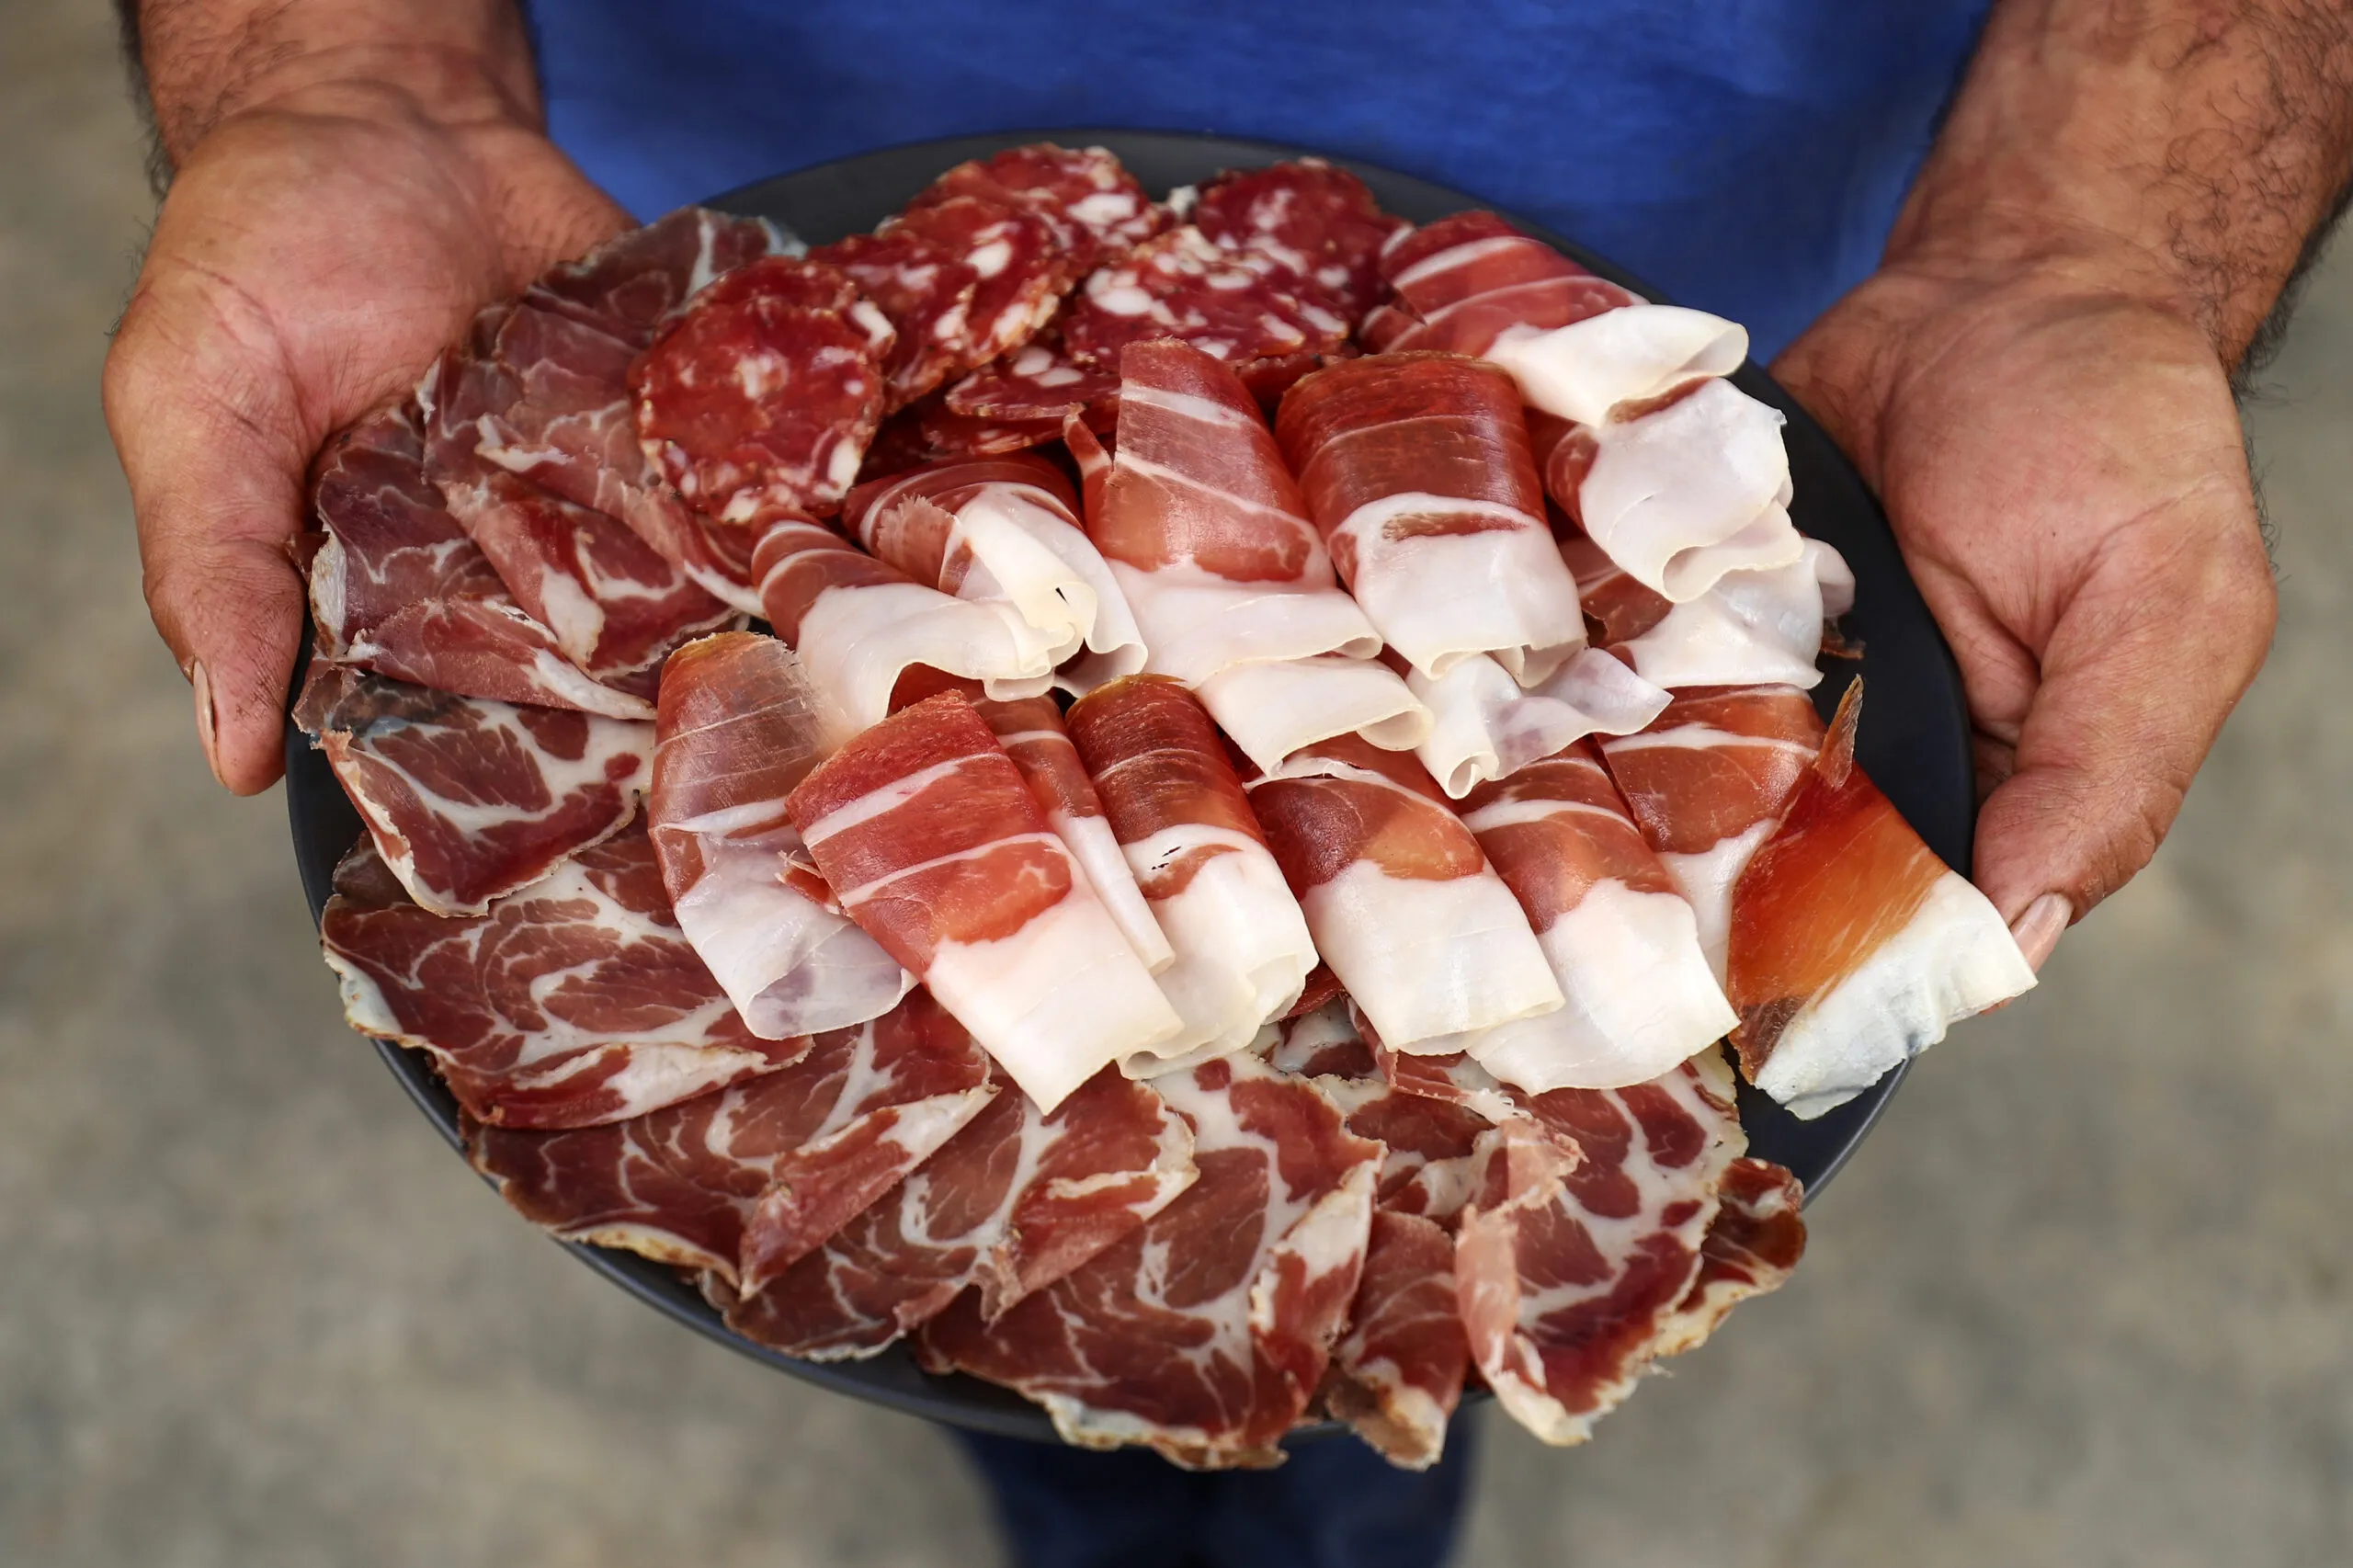 A plate of cured pork; capocollo, prosciutto and salami at Taluca Park free range farm in Exeter, Australia, on Thursday, Jan. 14, 2021. Australia's economy is recovering strongly and sentiment and hiring consistently improved in late 2020 as authorities managed to bring the virus under control. Photographer: Brendon Thorne/Bloomberg via Getty Images